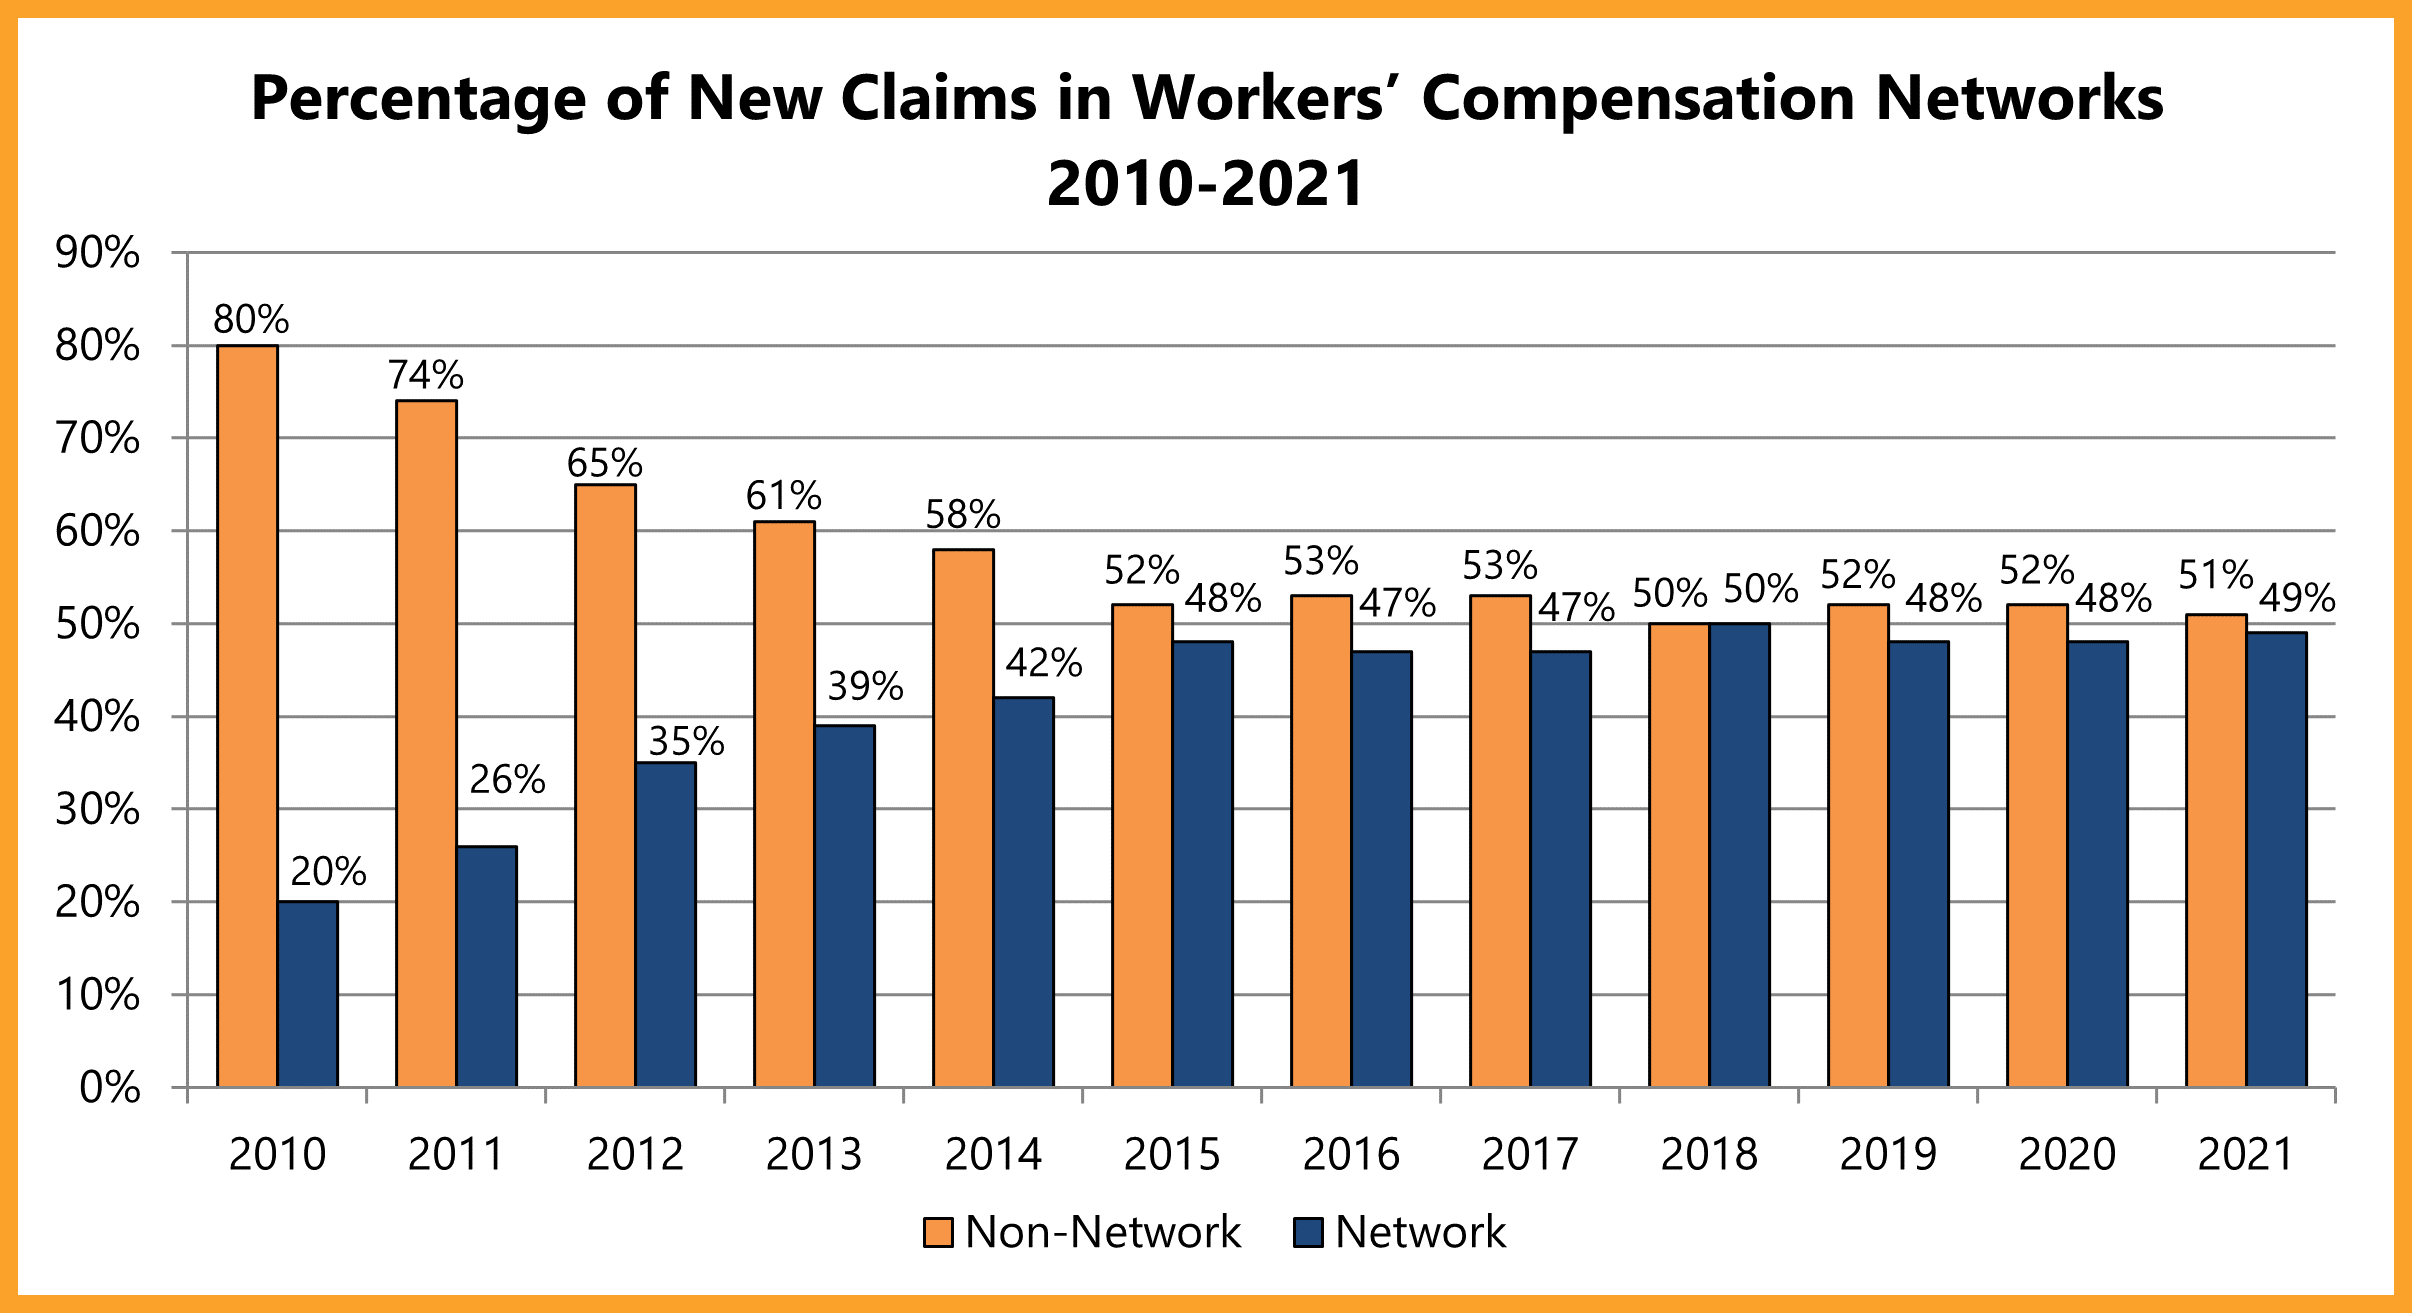  Percentage of New Claims in Workers’ Compensation Networks 2010-2021